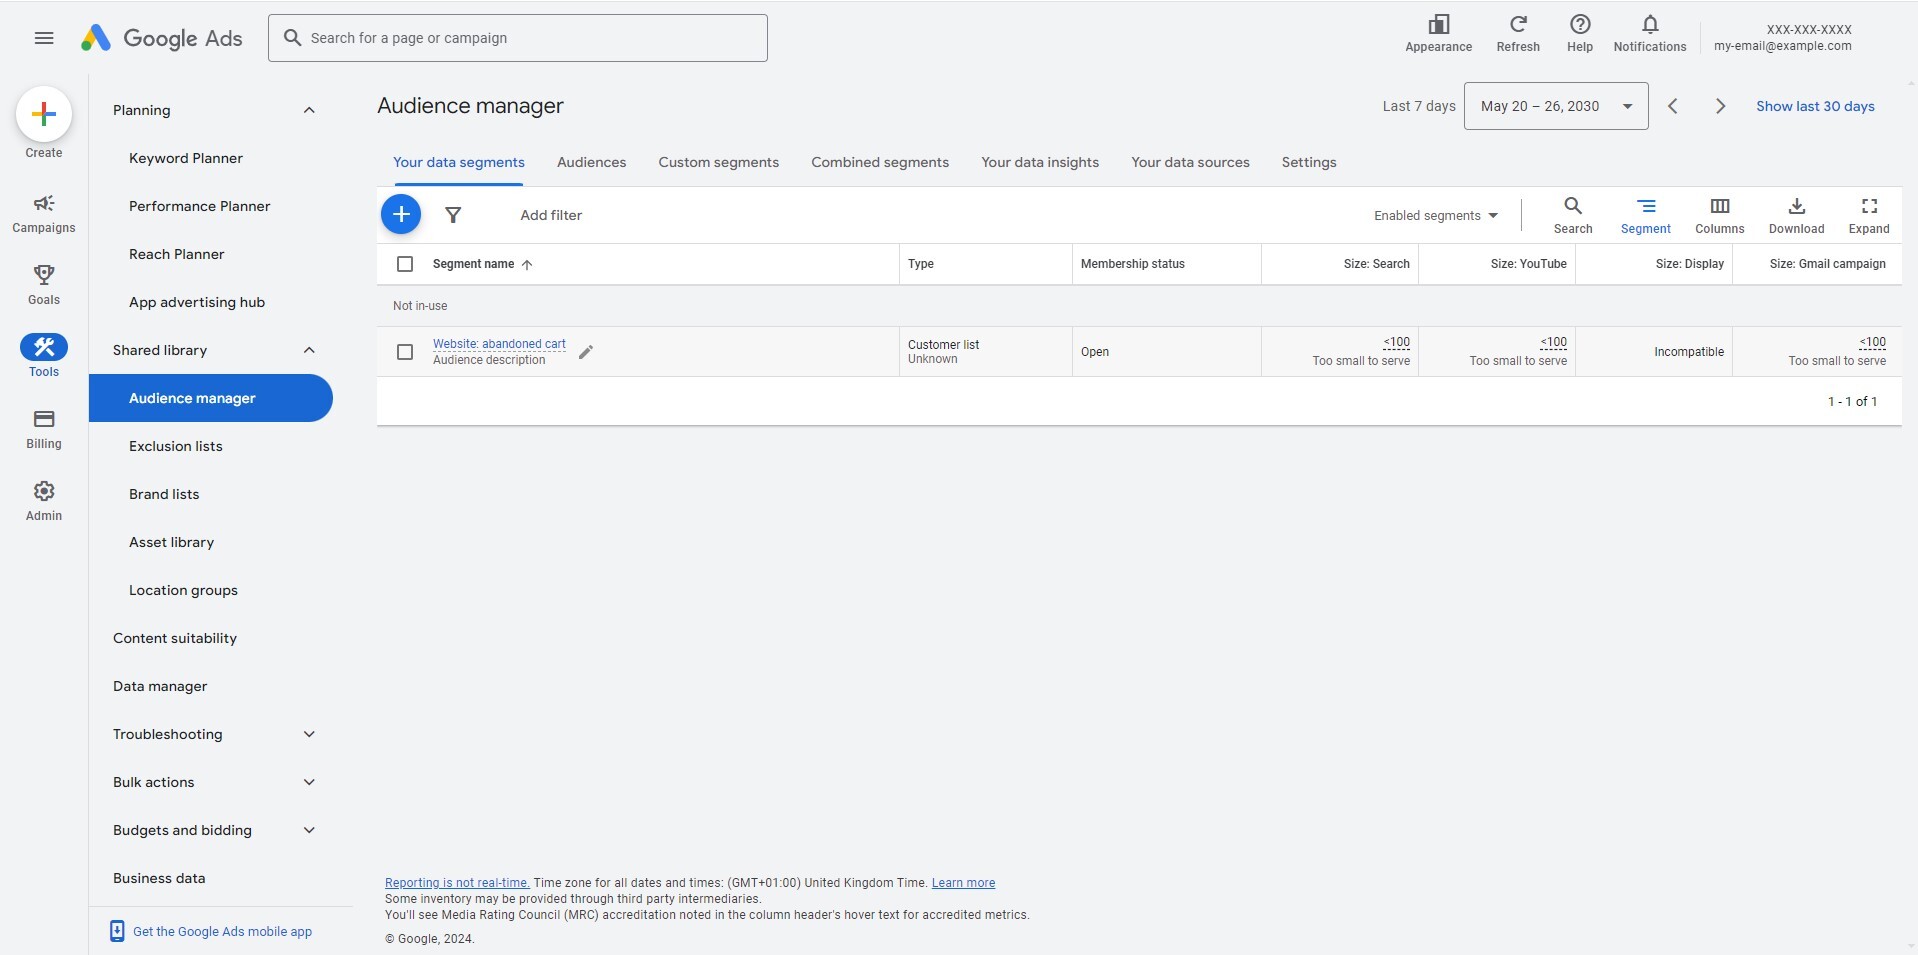 How to optimize Google Ads campaigns with Piwik PRO - Audience Manager in Google Ads